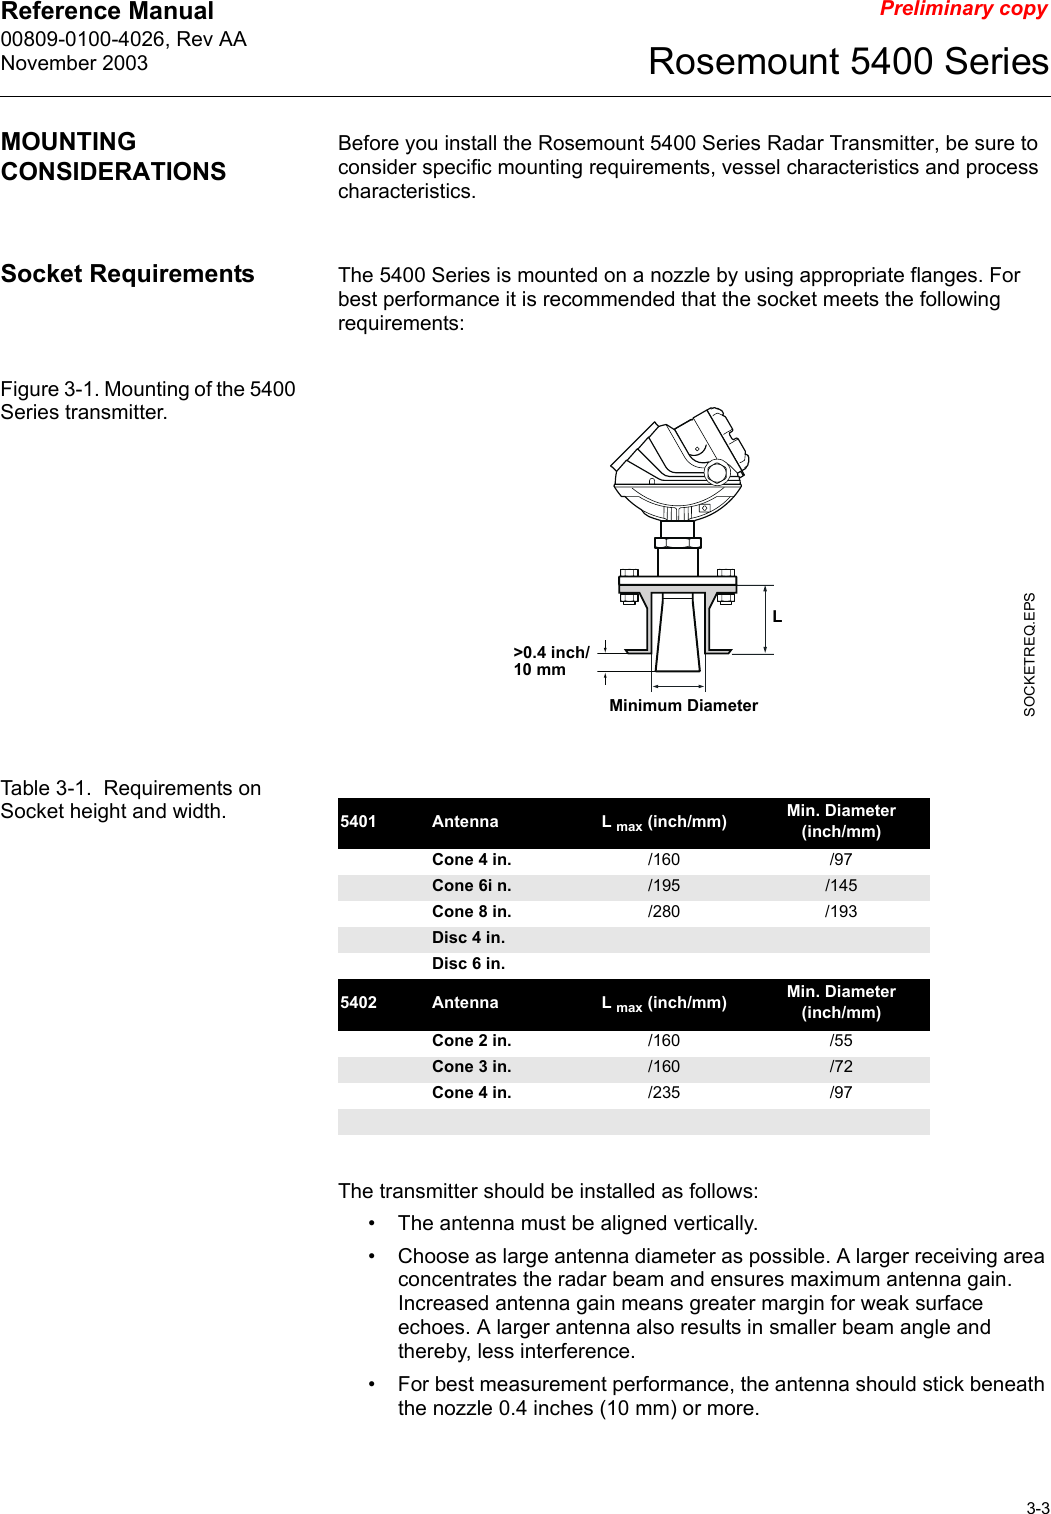 Reference Manual 00809-0100-4026, Rev AANovember 20033-3Rosemount 5400 SeriesPreliminary copyMOUNTING CONSIDERATIONSBefore you install the Rosemount 5400 Series Radar Transmitter, be sure to consider specific mounting requirements, vessel characteristics and process characteristics. Socket Requirements The 5400 Series is mounted on a nozzle by using appropriate flanges. For best performance it is recommended that the socket meets the following requirements:Figure 3-1. Mounting of the 5400 Series transmitter.Table 3-1.  Requirements on Socket height and width.The transmitter should be installed as follows:• The antenna must be aligned vertically. • Choose as large antenna diameter as possible. A larger receiving area concentrates the radar beam and ensures maximum antenna gain. Increased antenna gain means greater margin for weak surface echoes. A larger antenna also results in smaller beam angle and thereby, less interference.• For best measurement performance, the antenna should stick beneath the nozzle 0.4 inches (10 mm) or more.SOCKETREQ.EPSLMinimum Diameter&gt;0.4 inch/10 mm5401 Antenna L max (inch/mm) Min. Diameter (inch/mm)Cone 4 in. /160 /97Cone 6i n. /195 /145Cone 8 in. /280 /193Disc 4 in.Disc 6 in.5402 Antenna L max (inch/mm) Min. Diameter (inch/mm)Cone 2 in. /160 /55Cone 3 in. /160 /72Cone 4 in. /235 /97